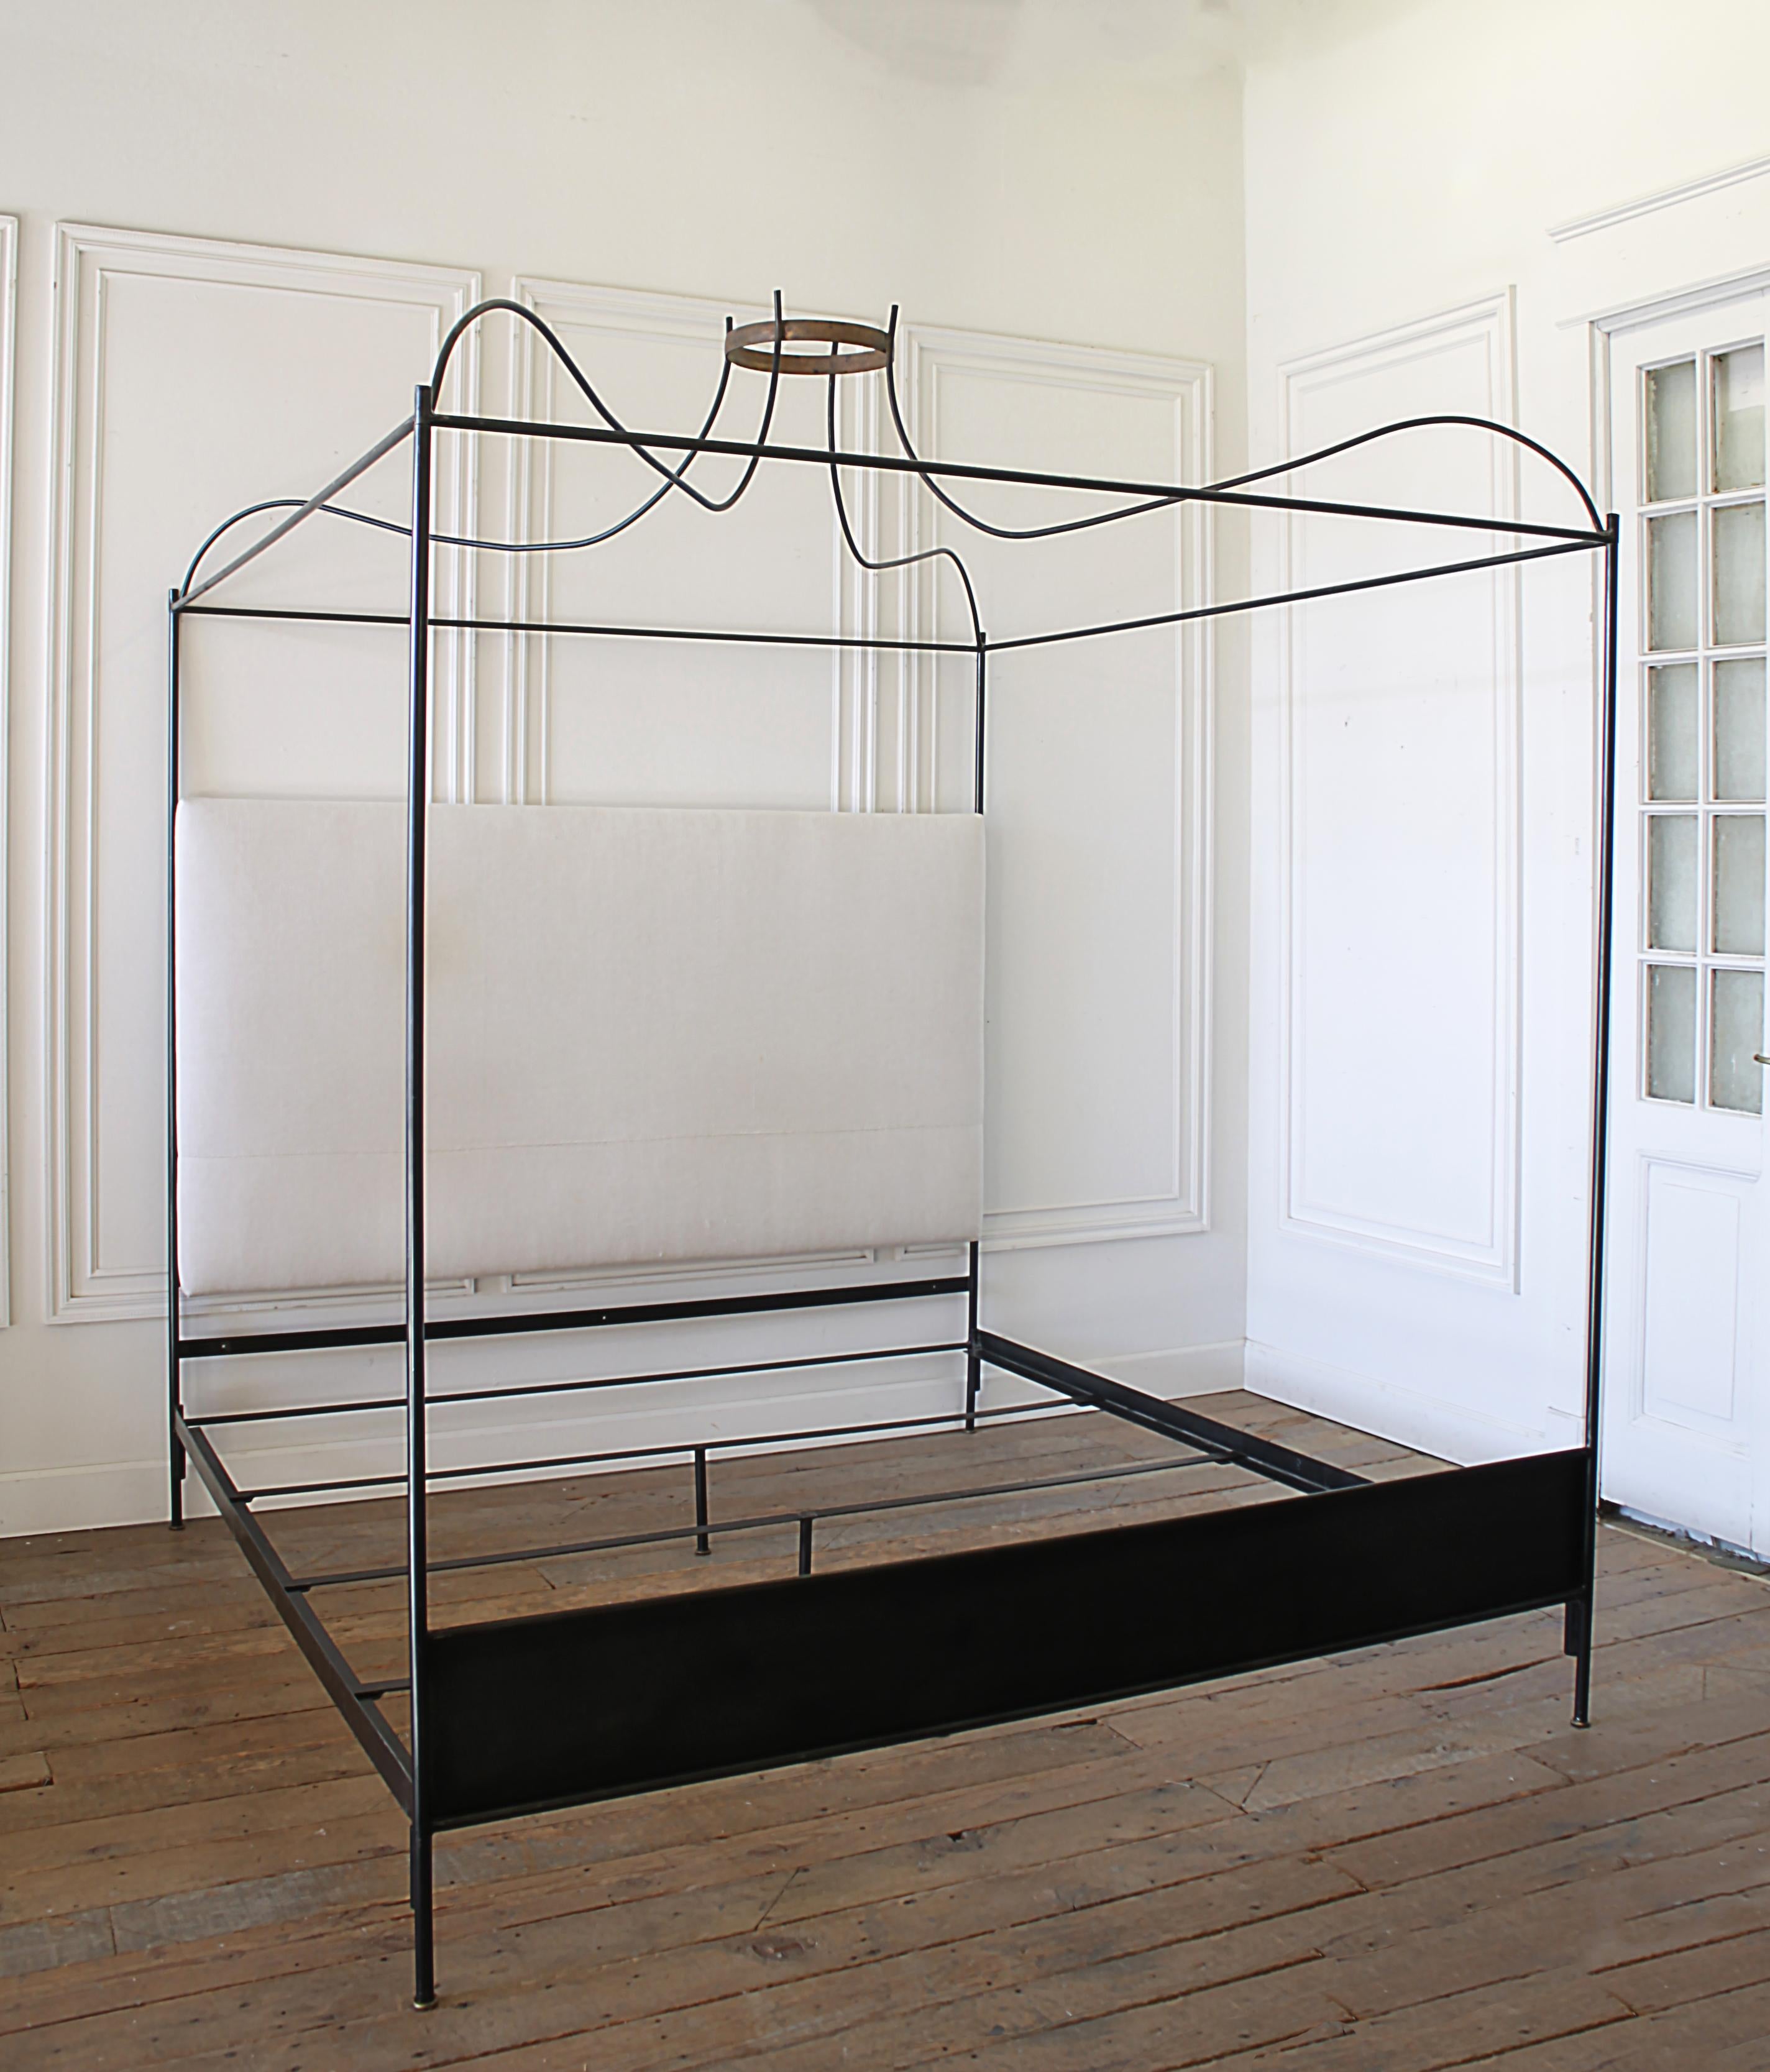 King size iron canopy bed with upholstered antique linen headboard
Custom iron canopy bed with gilt crown, and headboard (can be reupholstered in any material) This designer piece assemble easily and requires no additional hardware. Very solid and